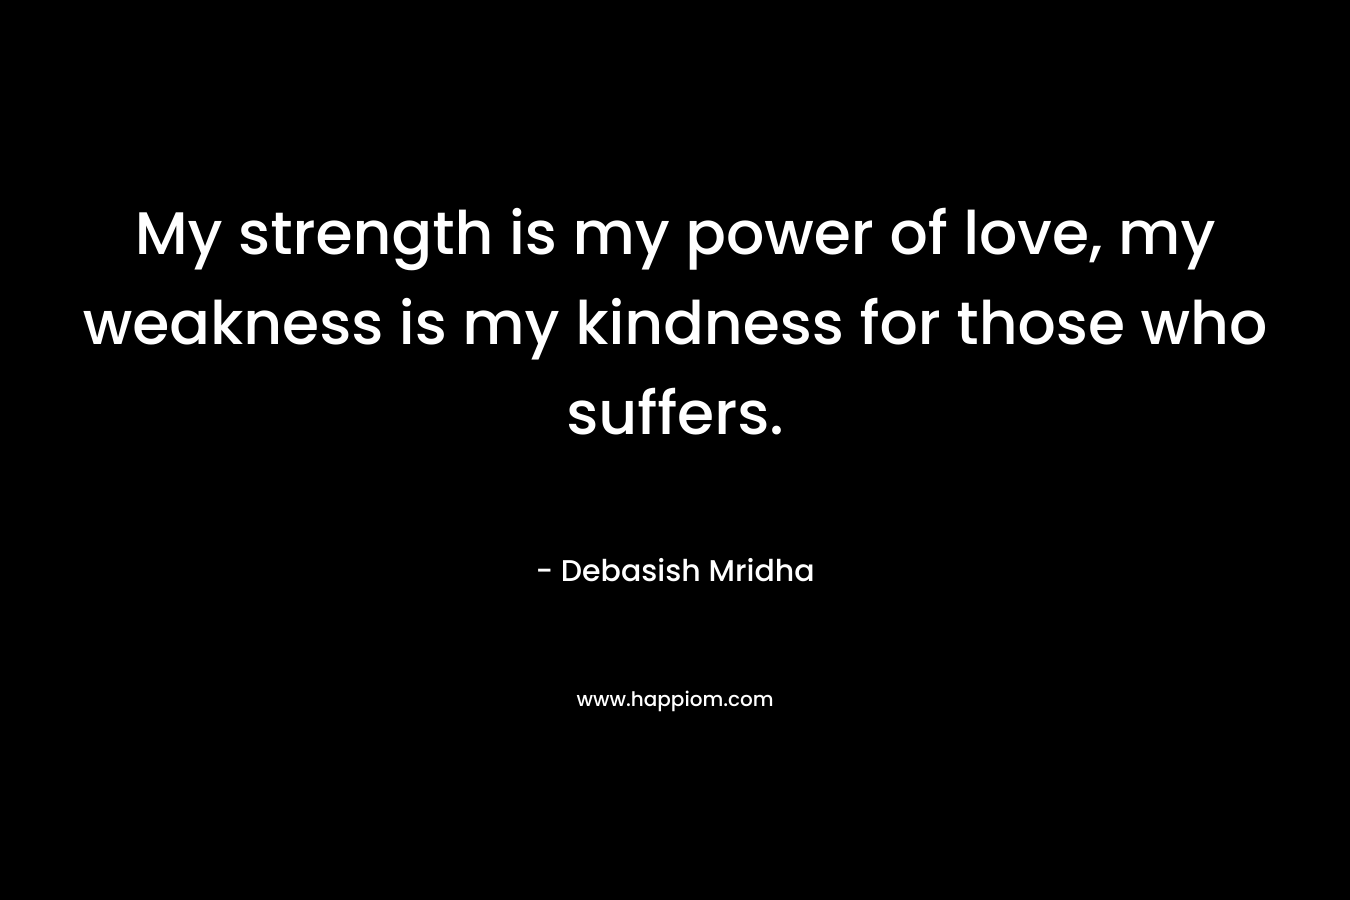 My strength is my power of love, my weakness is my kindness for those who suffers.